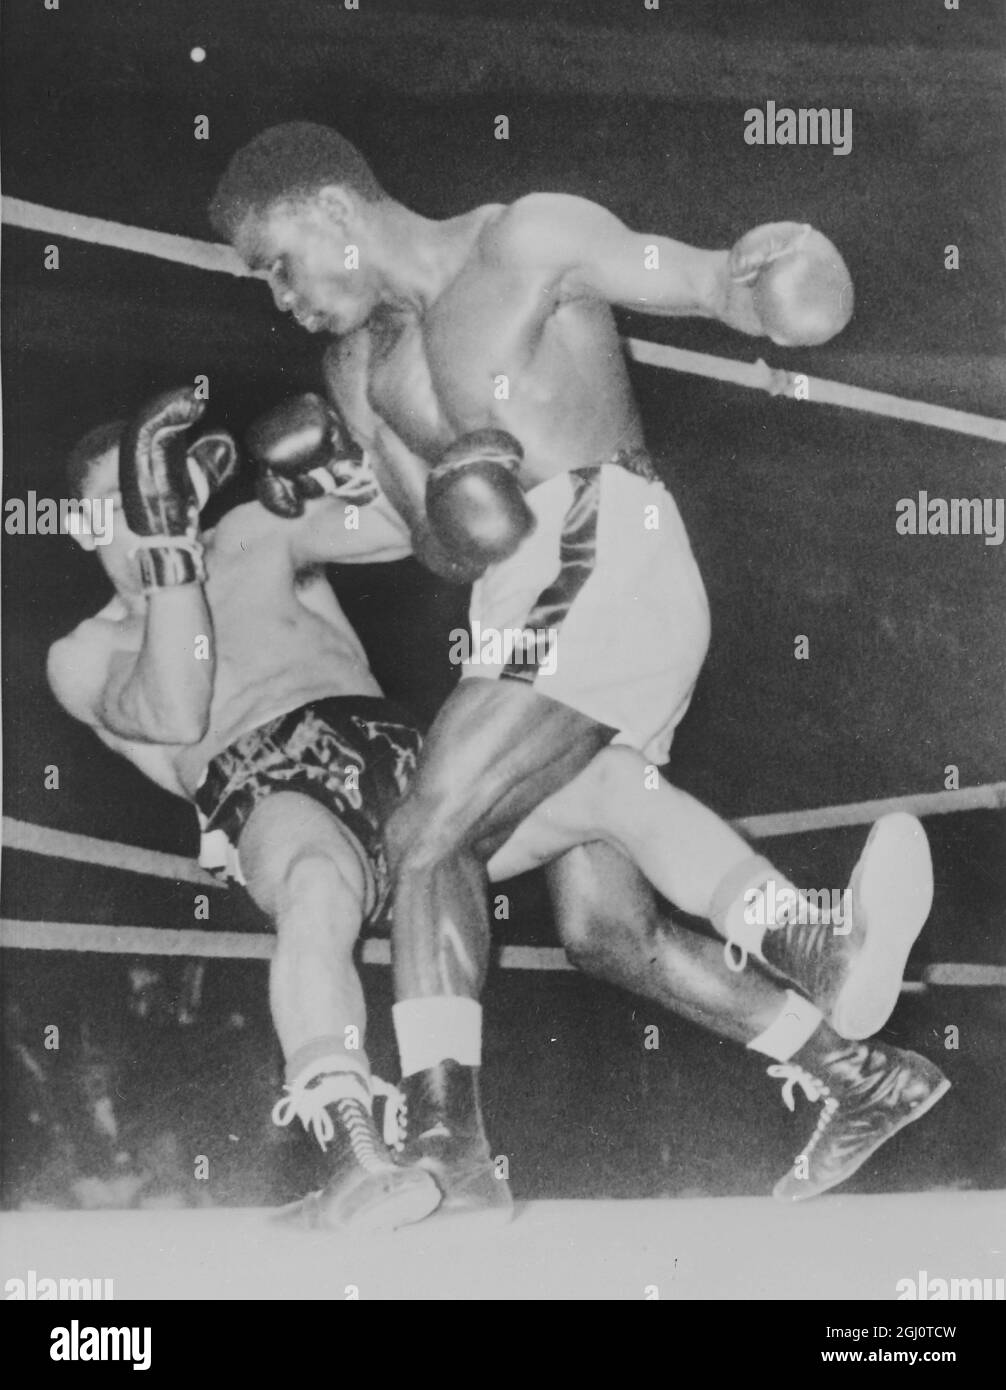 GENE ARMSTRONG V DICK TIGER BOXING MATCH 25 FEBRUARY 1960 Stock Photo